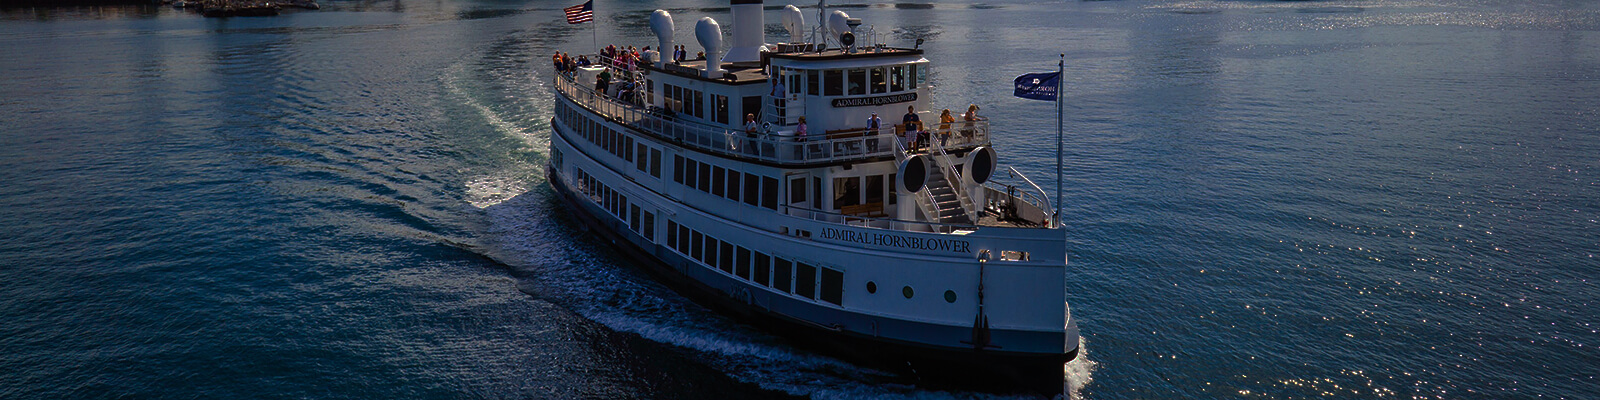 San Diego Dinner Cruise Coupons